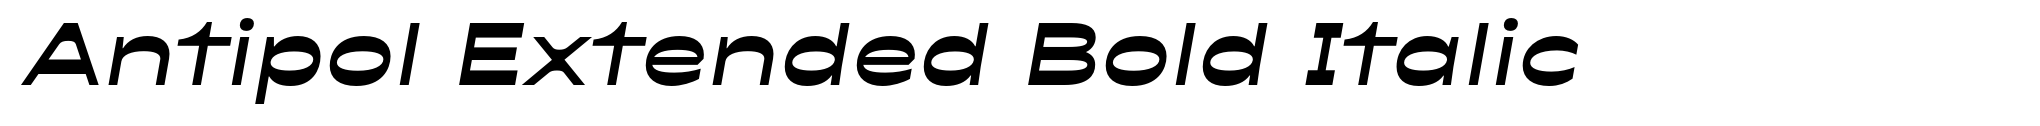 Antipol Extended Bold Italic image